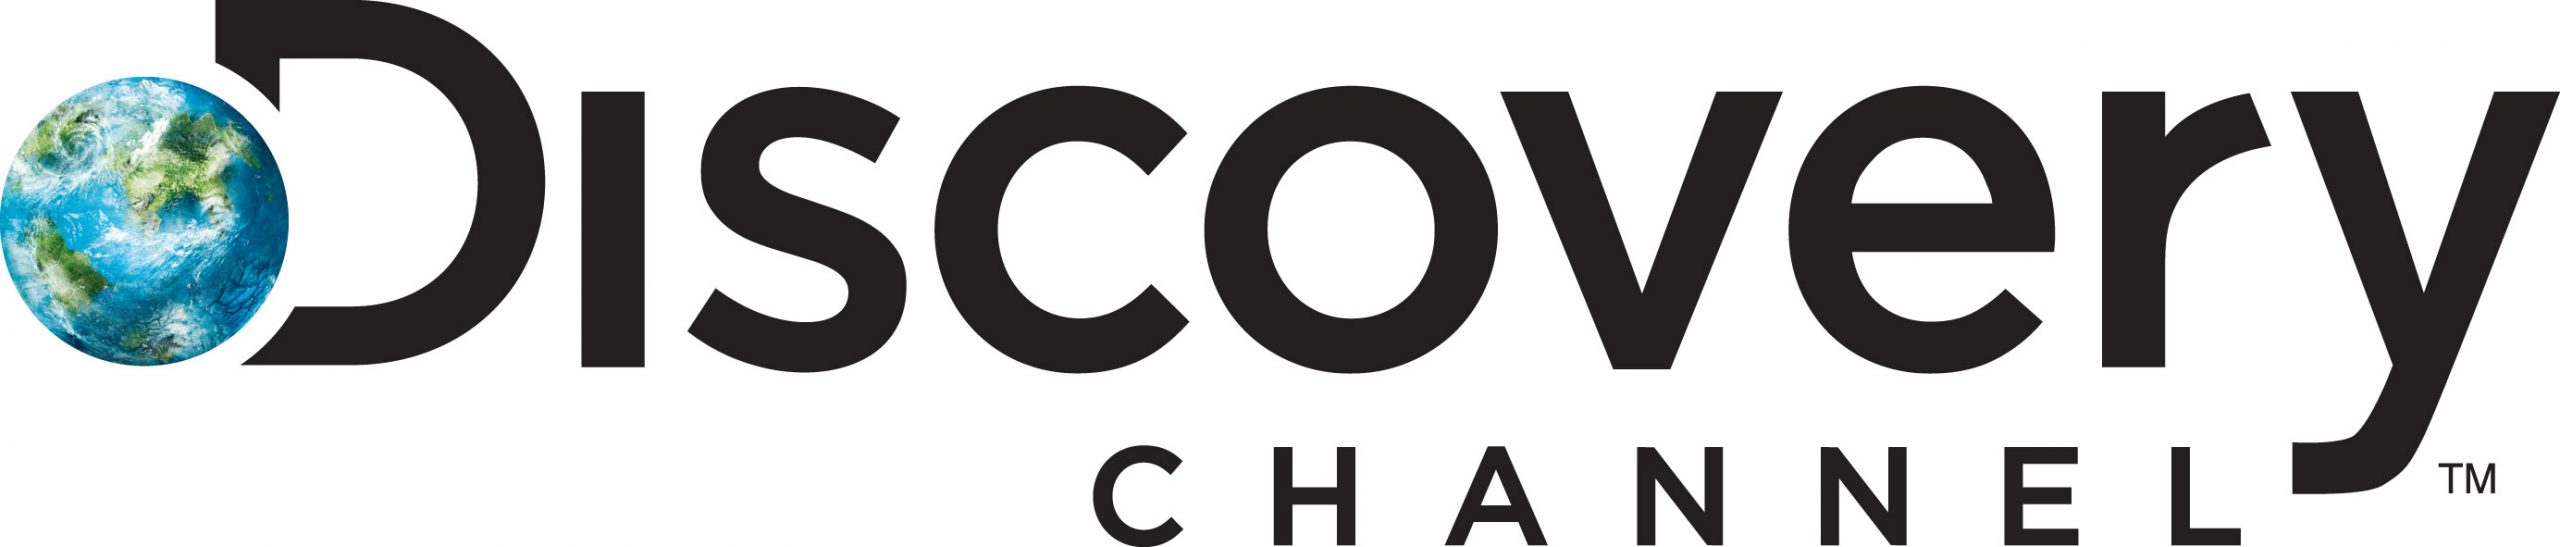 Discovery channel logo